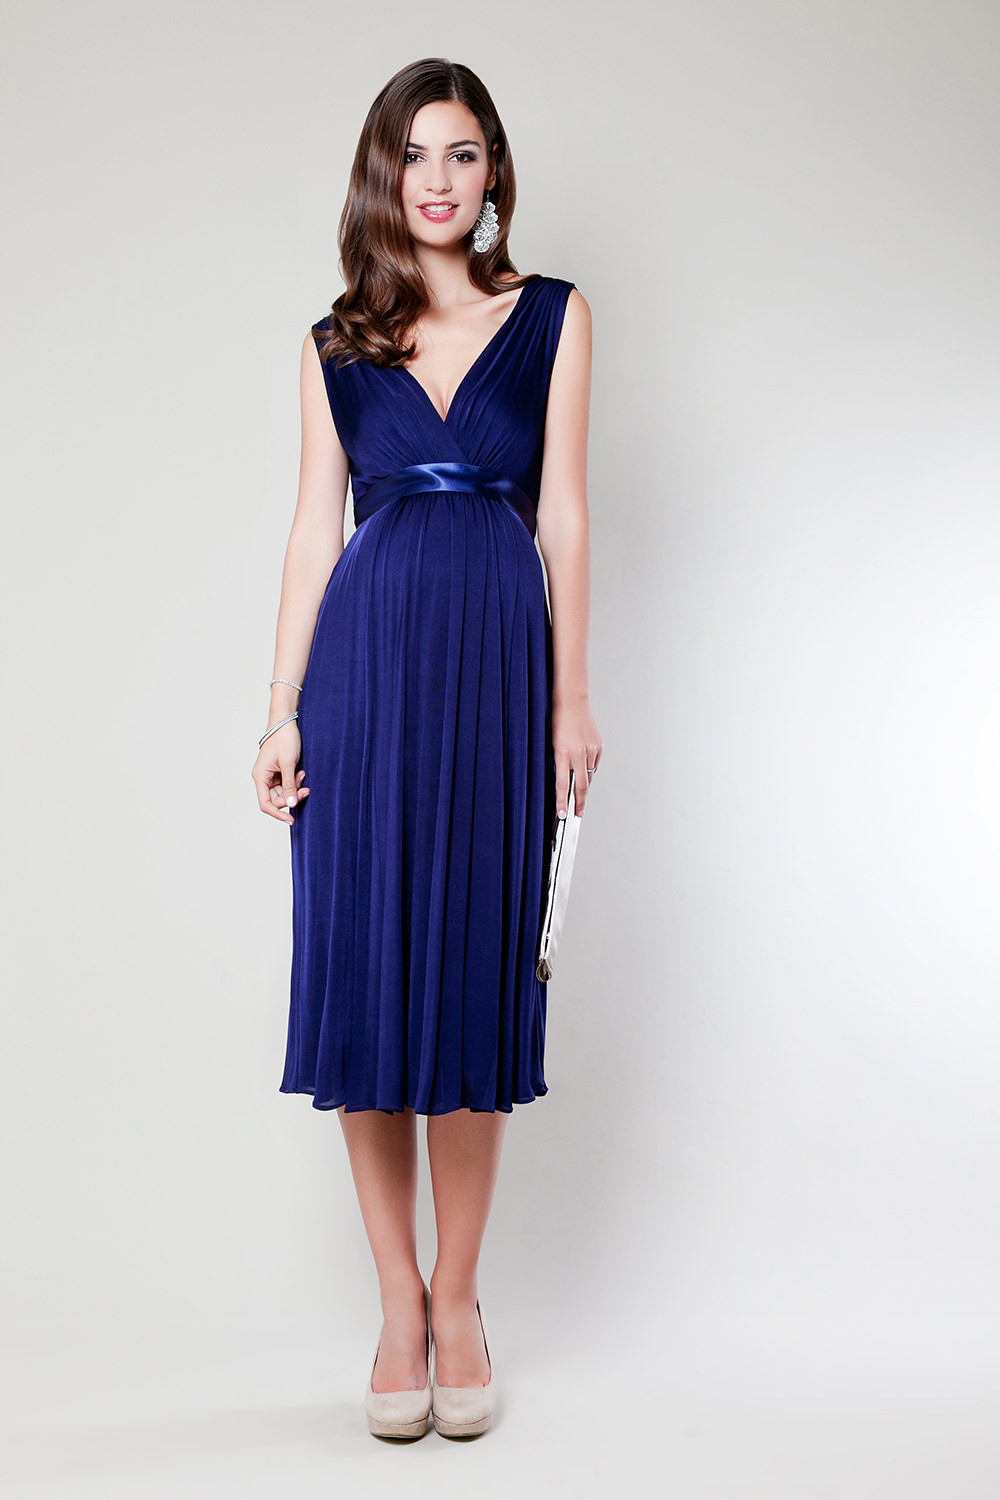 Maternity Dress For Wedding Guest
 The Best Maternity Wedding Guest Dresses